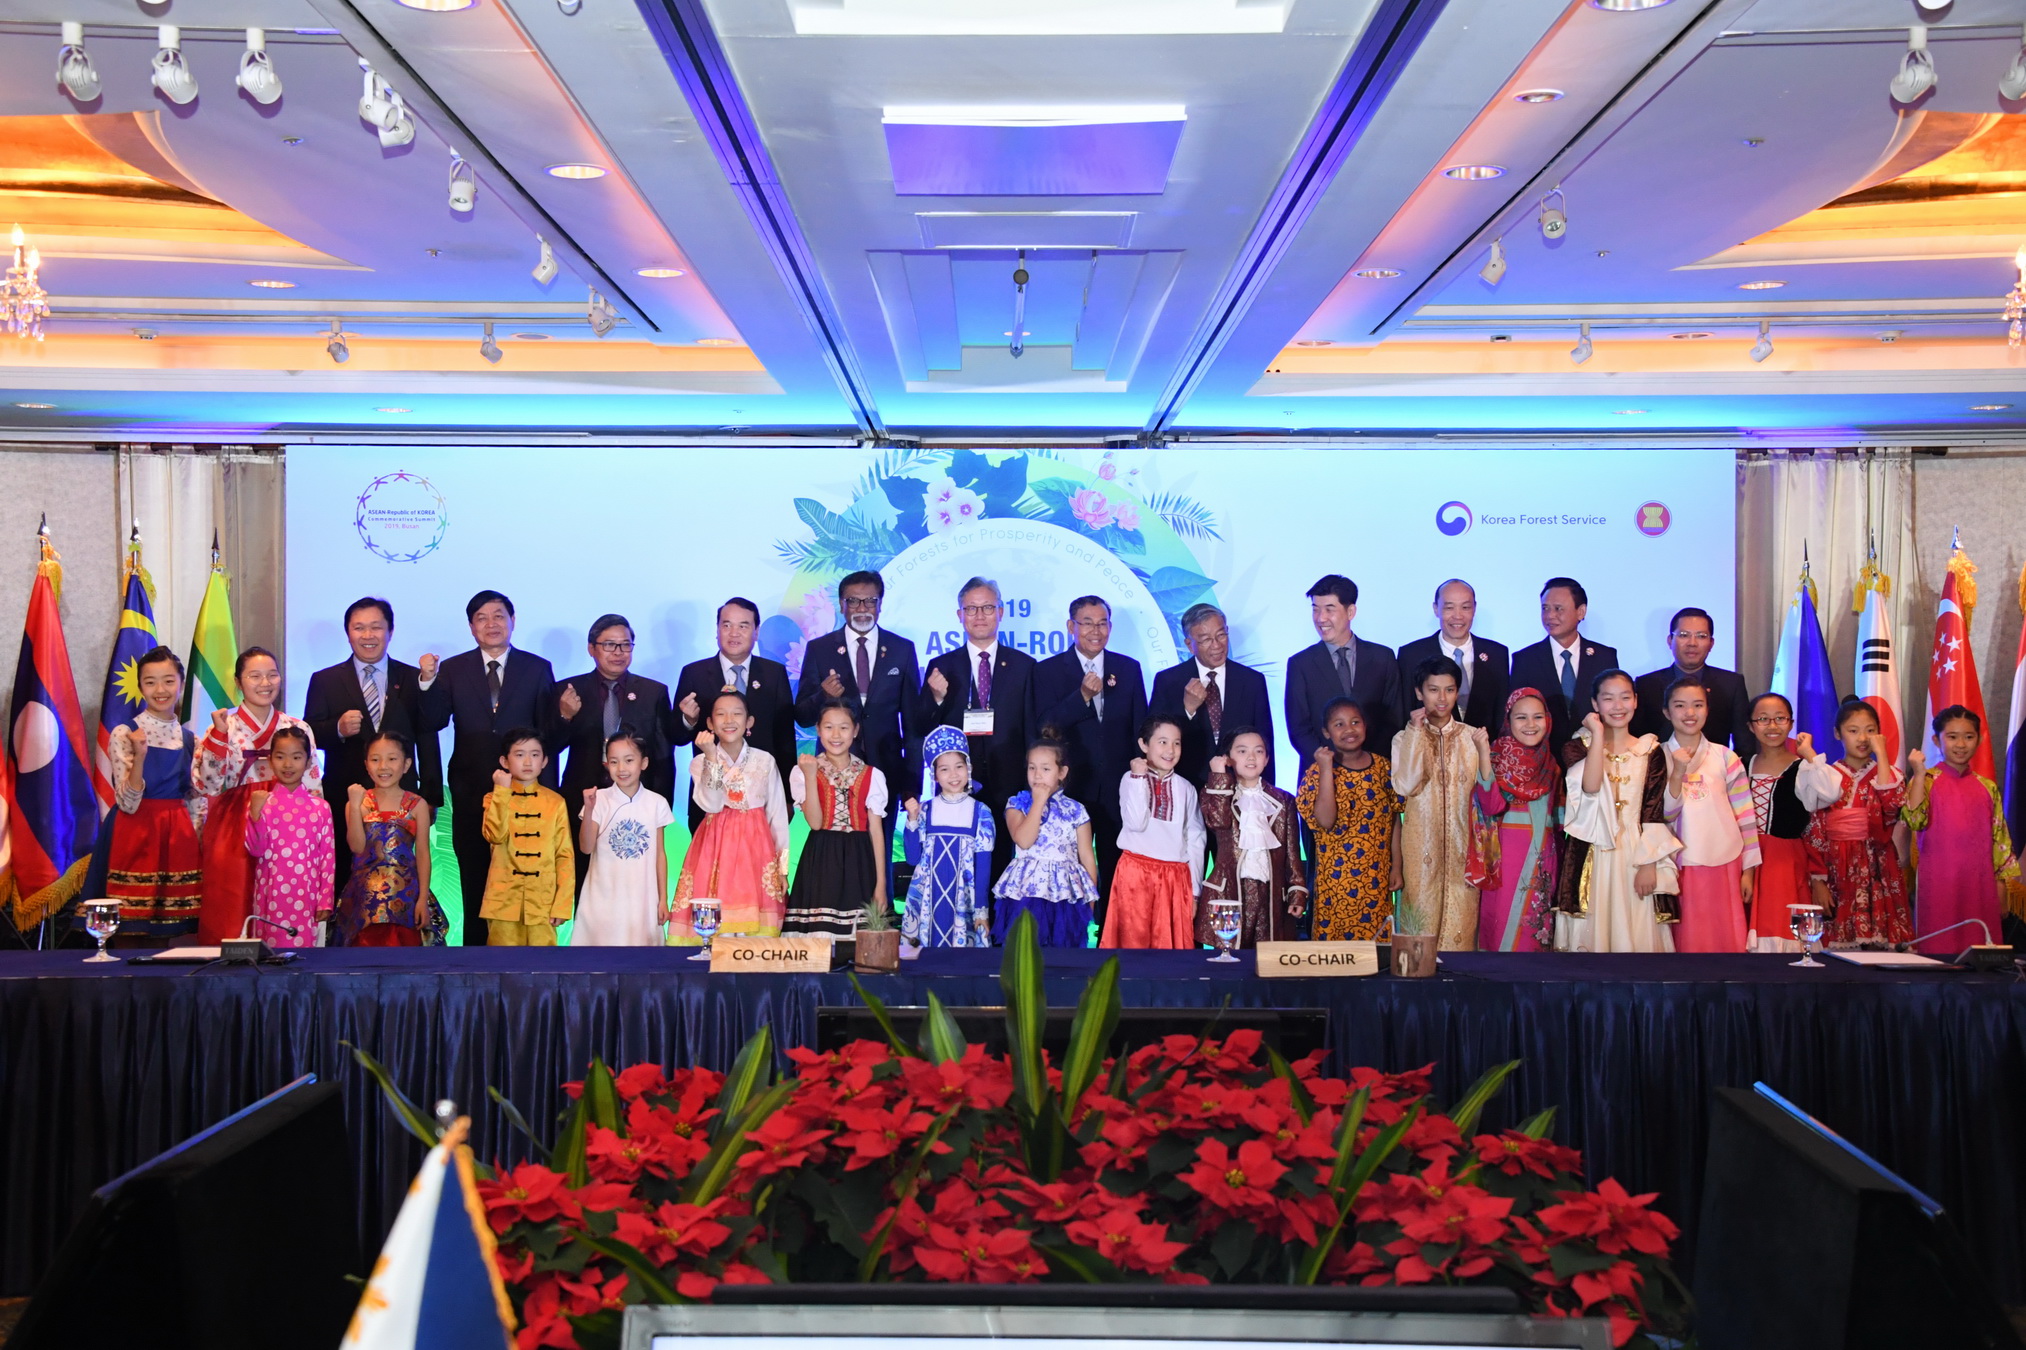 ASEAN-ROK High Level Meeting on Forestry 2019 